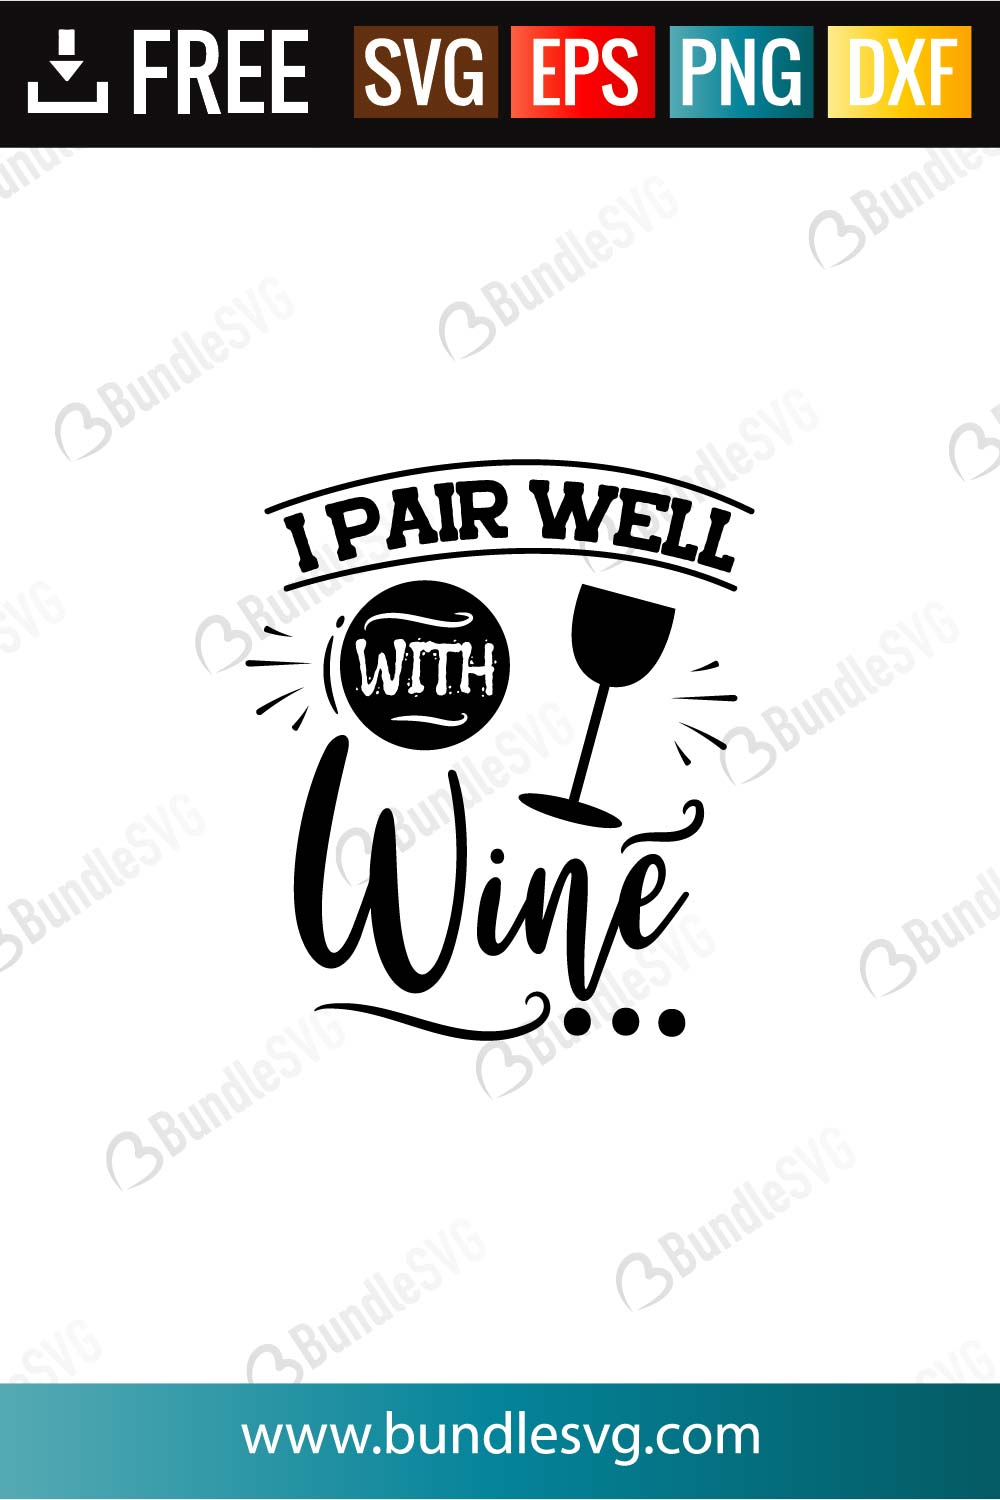 Download I Pair Well With Wine Svg Cut Files Bundlesvg